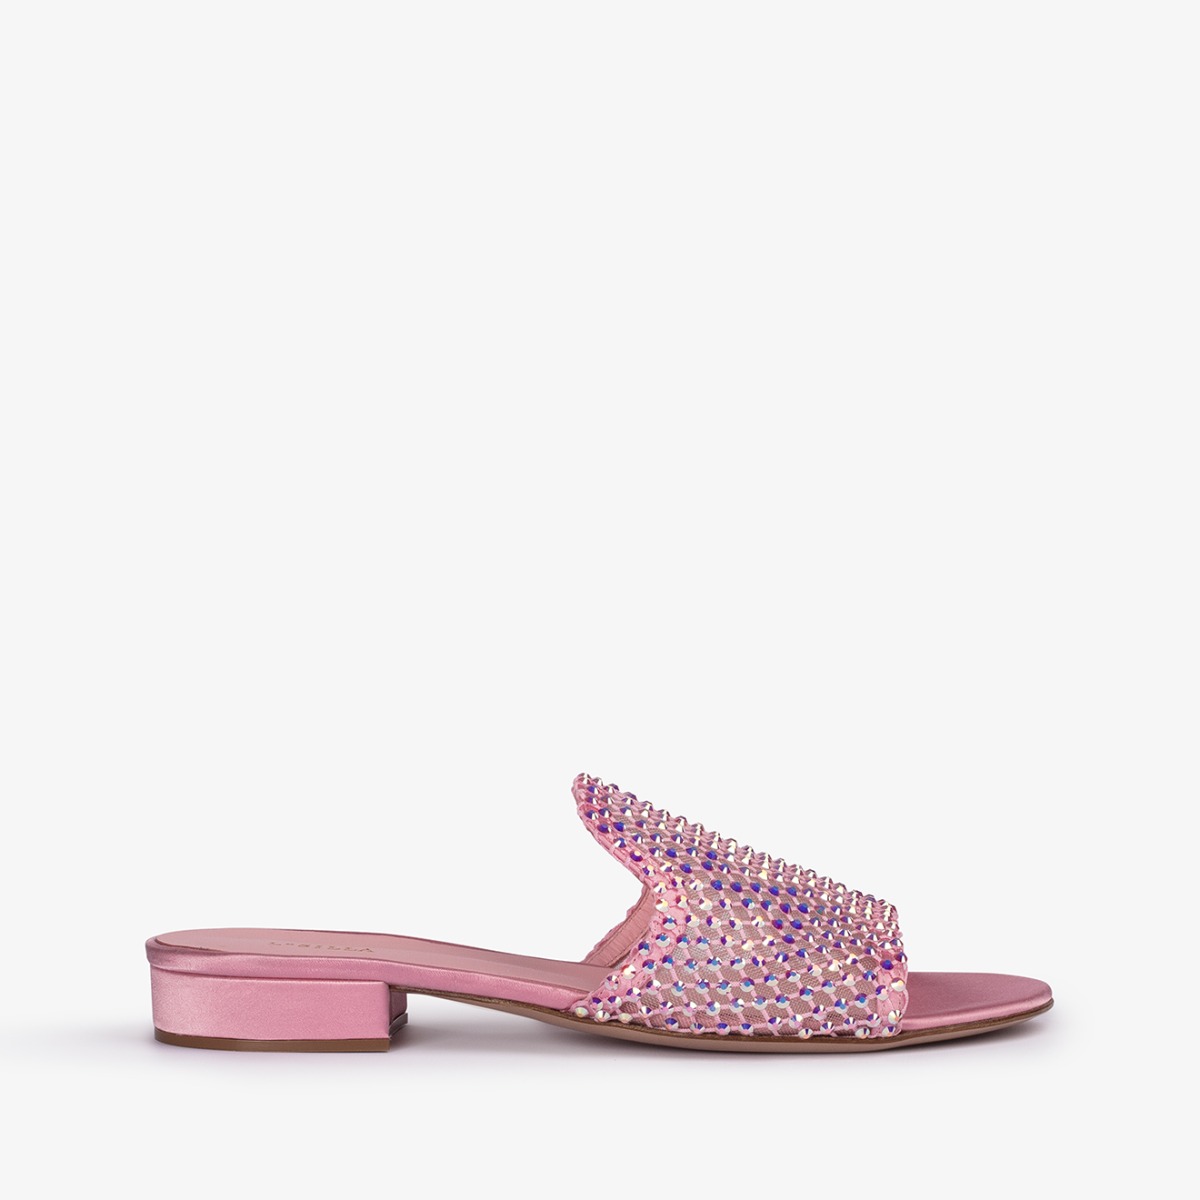 Goddess pink fishnet mule sandal with Crystals - Le Silla